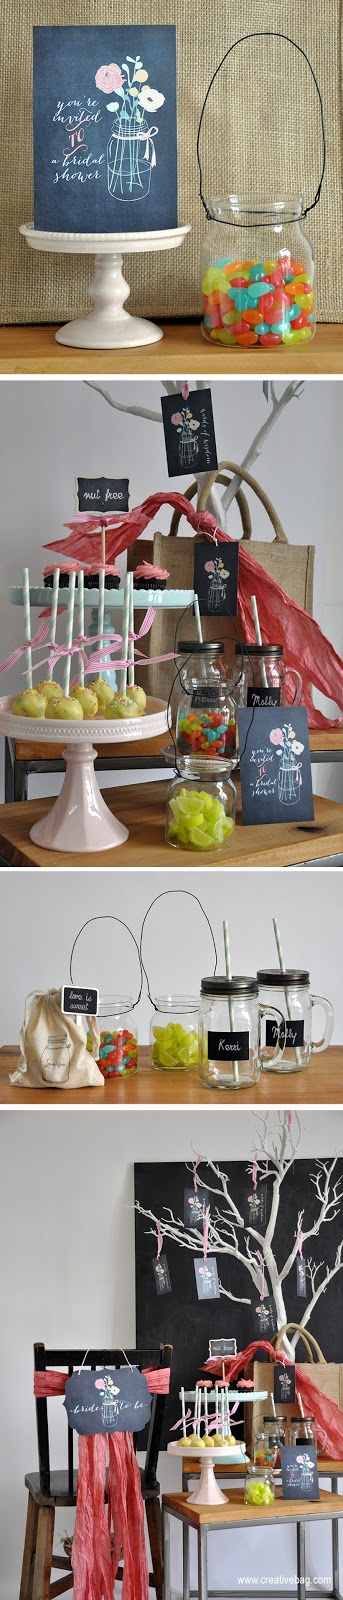 bridal shower ideas from Creative Bag